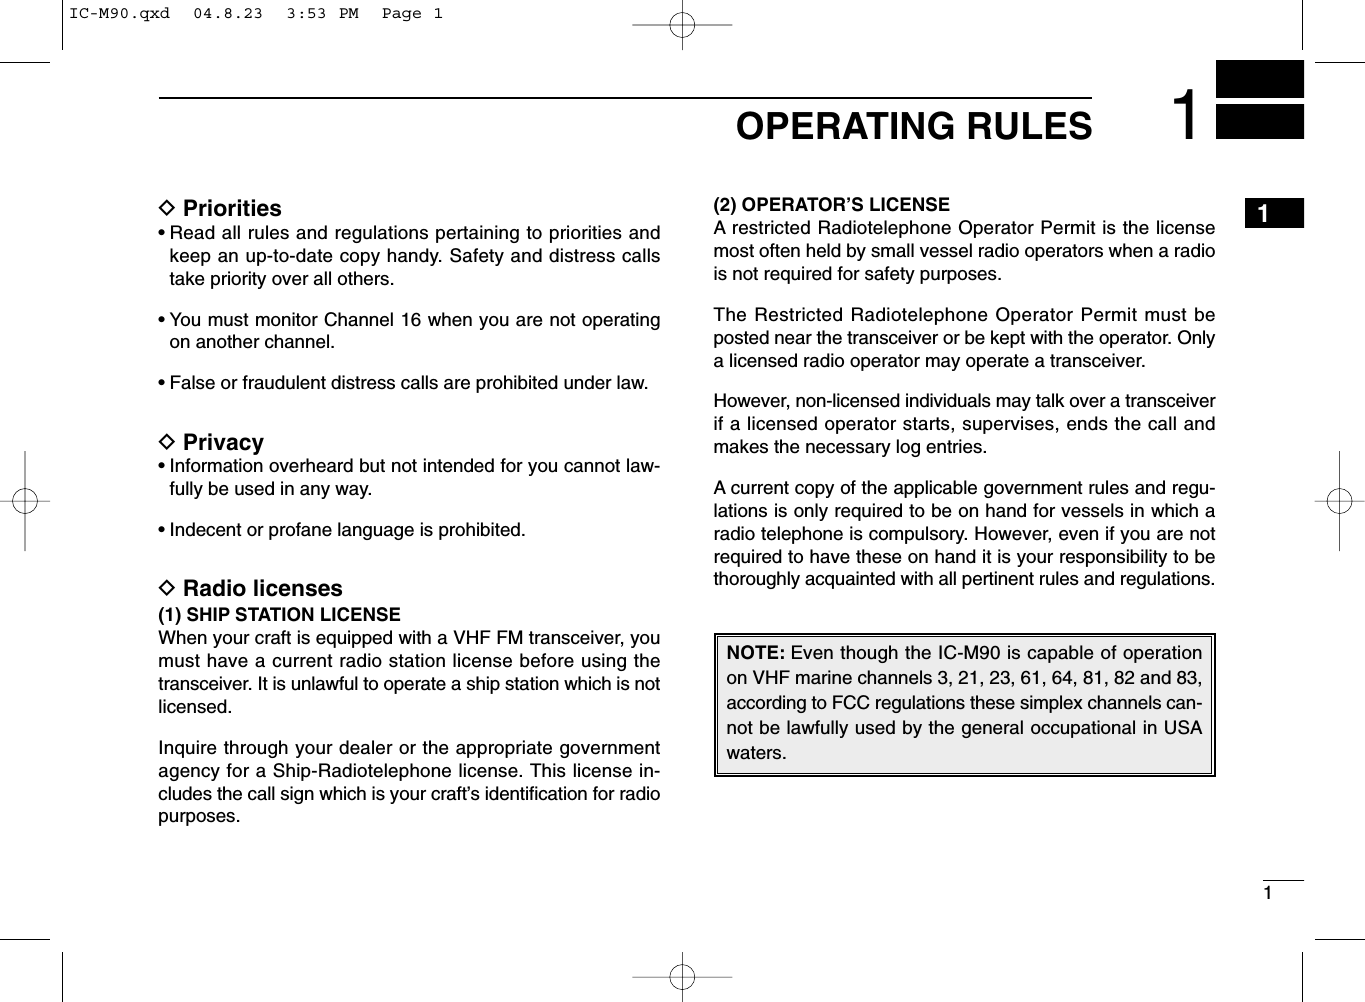 11OPERATING RULESDPriorities• Read all rules and regulations pertaining to priorities andkeep an up-to-date copy handy. Safety and distress callstake priority over all others.• You must monitor Channel 16 when you are not operatingon another channel.• False or fraudulent distress calls are prohibited under law.DPrivacy• Information overheard but not intended for you cannot law-fully be used in any way.• Indecent or profane language is prohibited.DRadio licenses(1) SHIP STATION LICENSEWhen your craft is equipped with a VHF FM transceiver, youmust have a current radio station license before using thetransceiver. It is unlawful to operate a ship station which is notlicensed.Inquire through your dealer or the appropriate governmentagency for a Ship-Radiotelephone license. This license in-cludes the call sign which is your craft’s identiﬁcation for radiopurposes.(2) OPERATOR’S LICENSEA restricted Radiotelephone Operator Permit is the licensemost often held by small vessel radio operators when a radiois not required for safety purposes.The Restricted Radiotelephone Operator Permit must beposted near the transceiver or be kept with the operator. Onlya licensed radio operator may operate a transceiver.However, non-licensed individuals may talk over a transceiverif a licensed operator starts, supervises, ends the call andmakes the necessary log entries.A current copy of the applicable government rules and regu-lations is only required to be on hand for vessels in which aradio telephone is compulsory. However, even if you are notrequired to have these on hand it is your responsibility to bethoroughly acquainted with all pertinent rules and regulations.NOTE: Even though the IC-M90 is capable of operationon VHF marine channels 3, 21, 23, 61, 64, 81, 82 and 83,according to FCC regulations these simplex channels can-not be lawfully used by the general occupational in USAwaters.1IC-M90.qxd  04.8.23  3:53 PM  Page 1